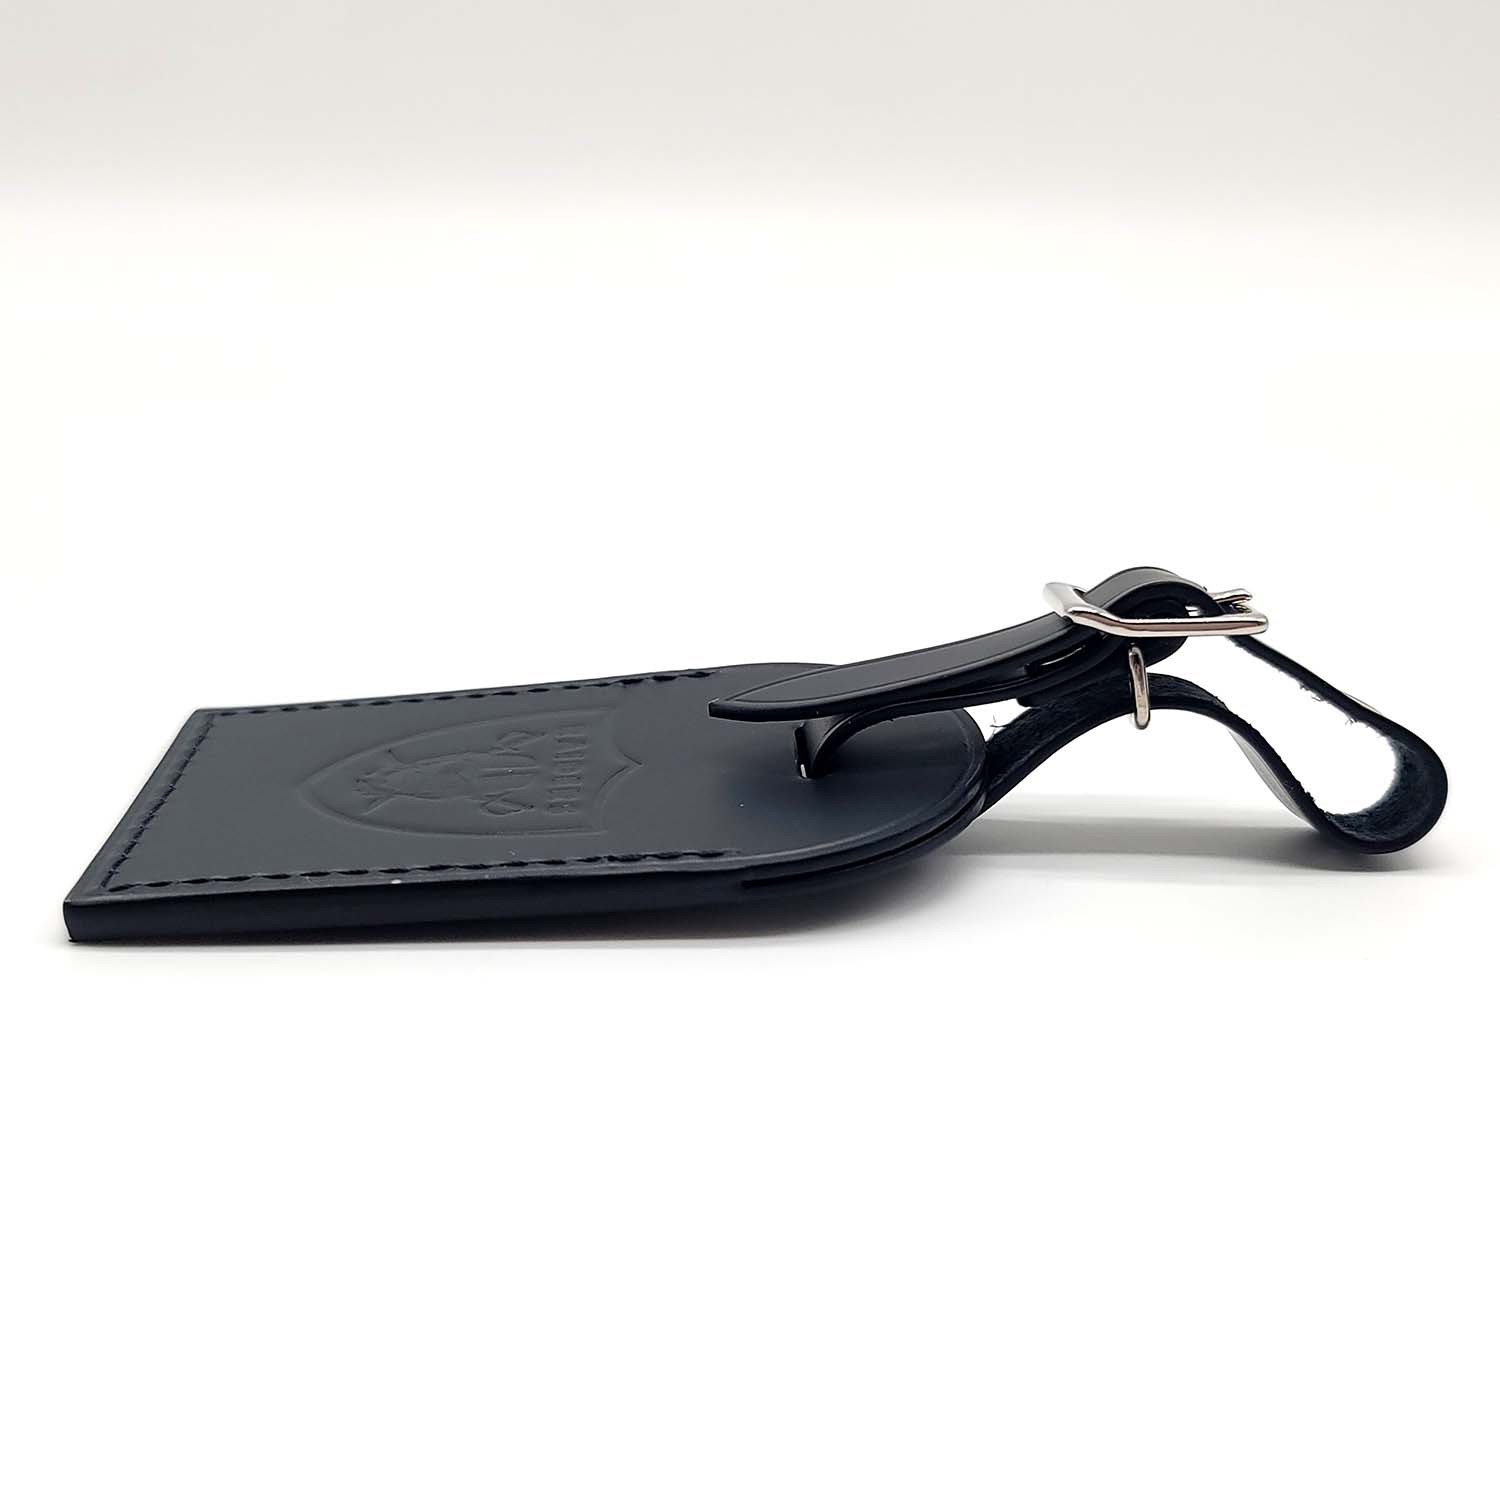 Lv Luggage Tag Sizes  Natural Resource Department